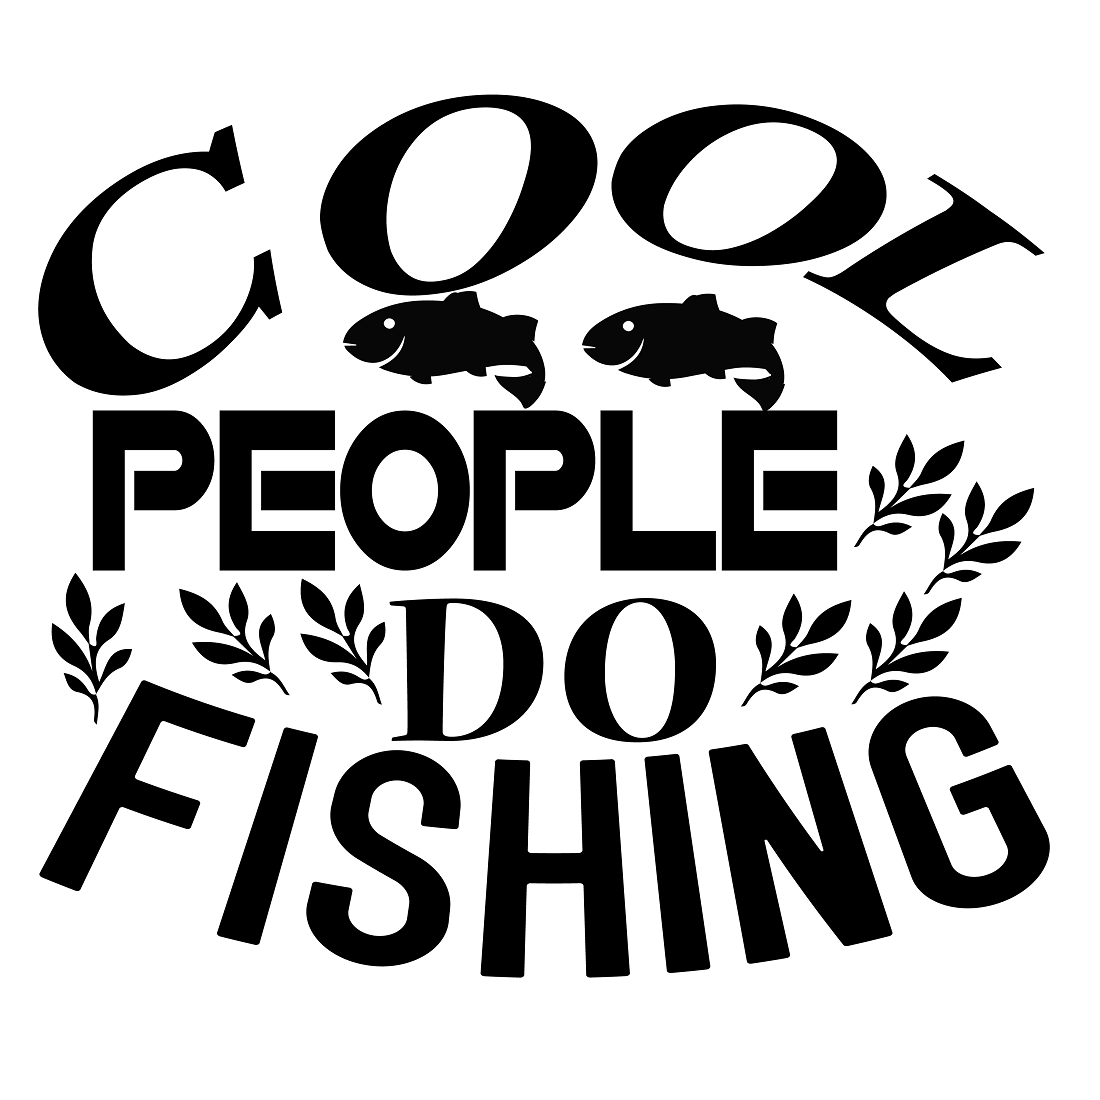 Cool people do fishing preview image.